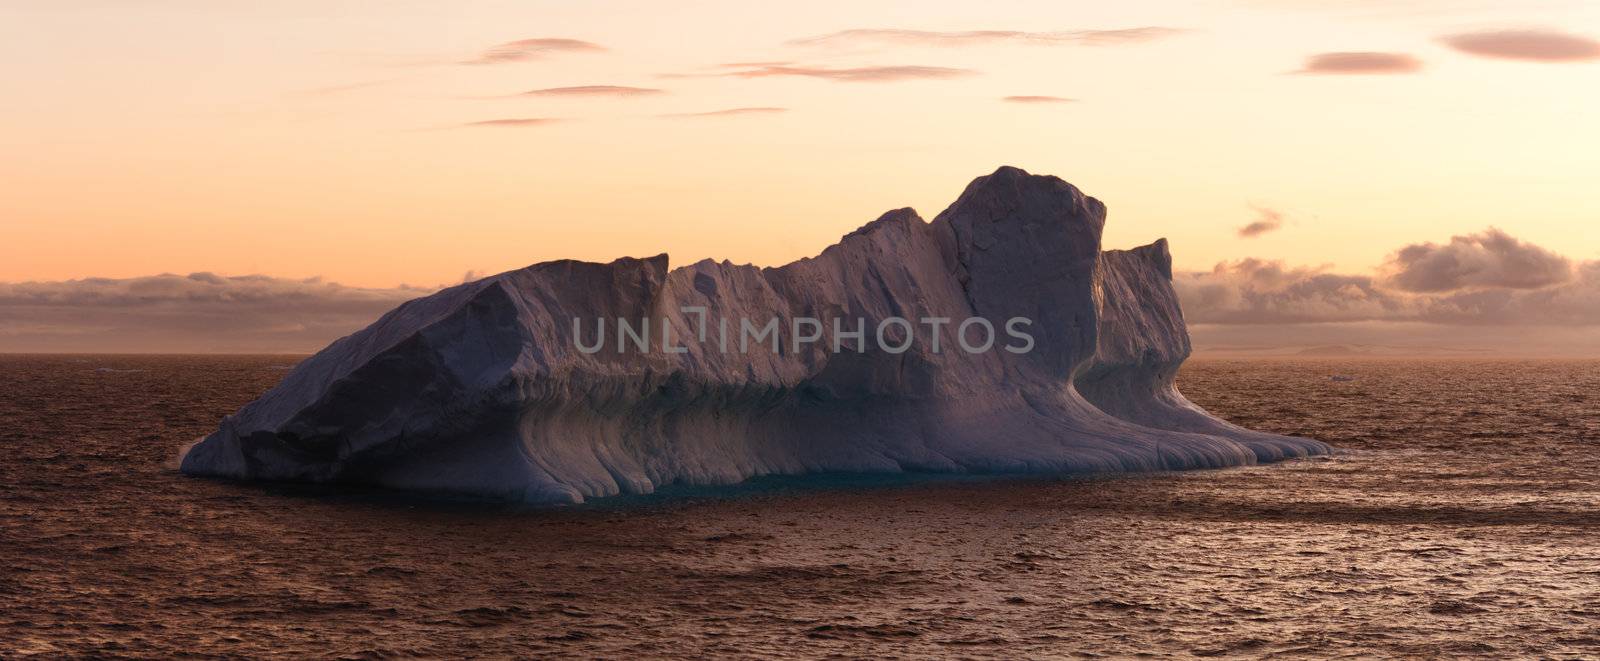 Large Iceberg Floating in Sea at Dusk by abey